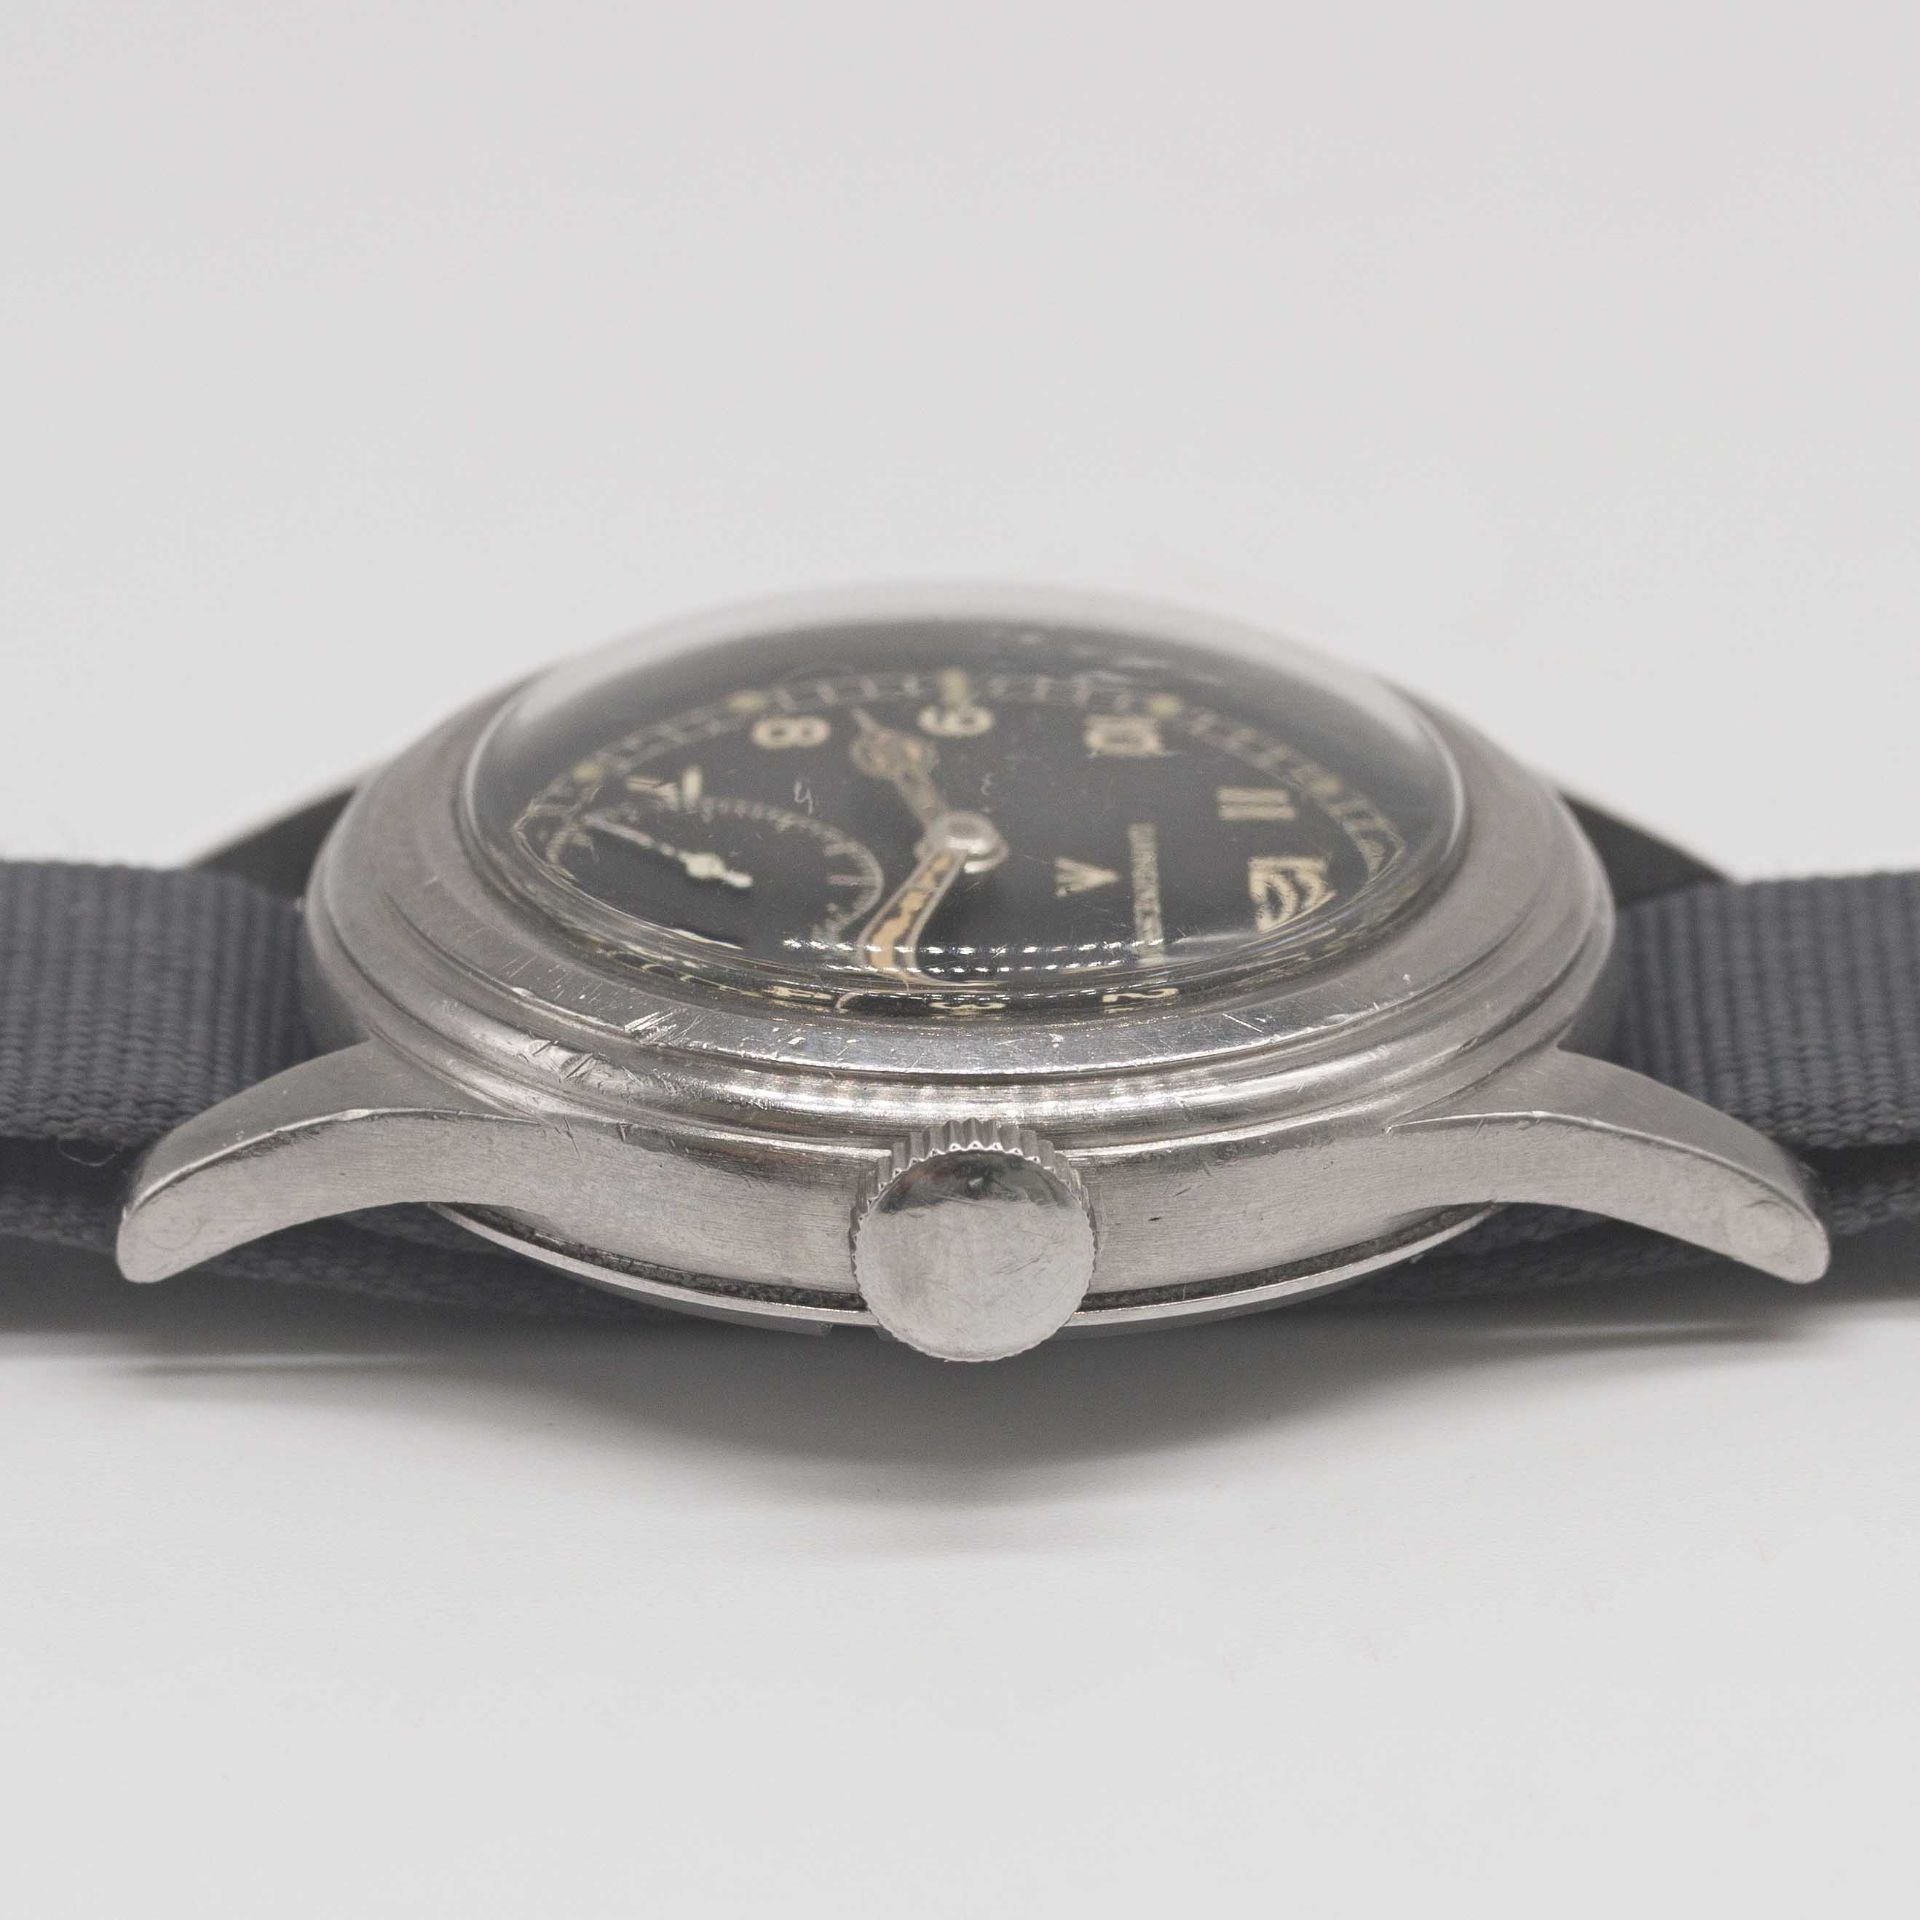 A GENTLEMAN'S STAINLESS STEEL BRITISH MILITARY LONGINES W.W.W. WRIST WATCH CIRCA 1945, PART OF - Image 7 of 9